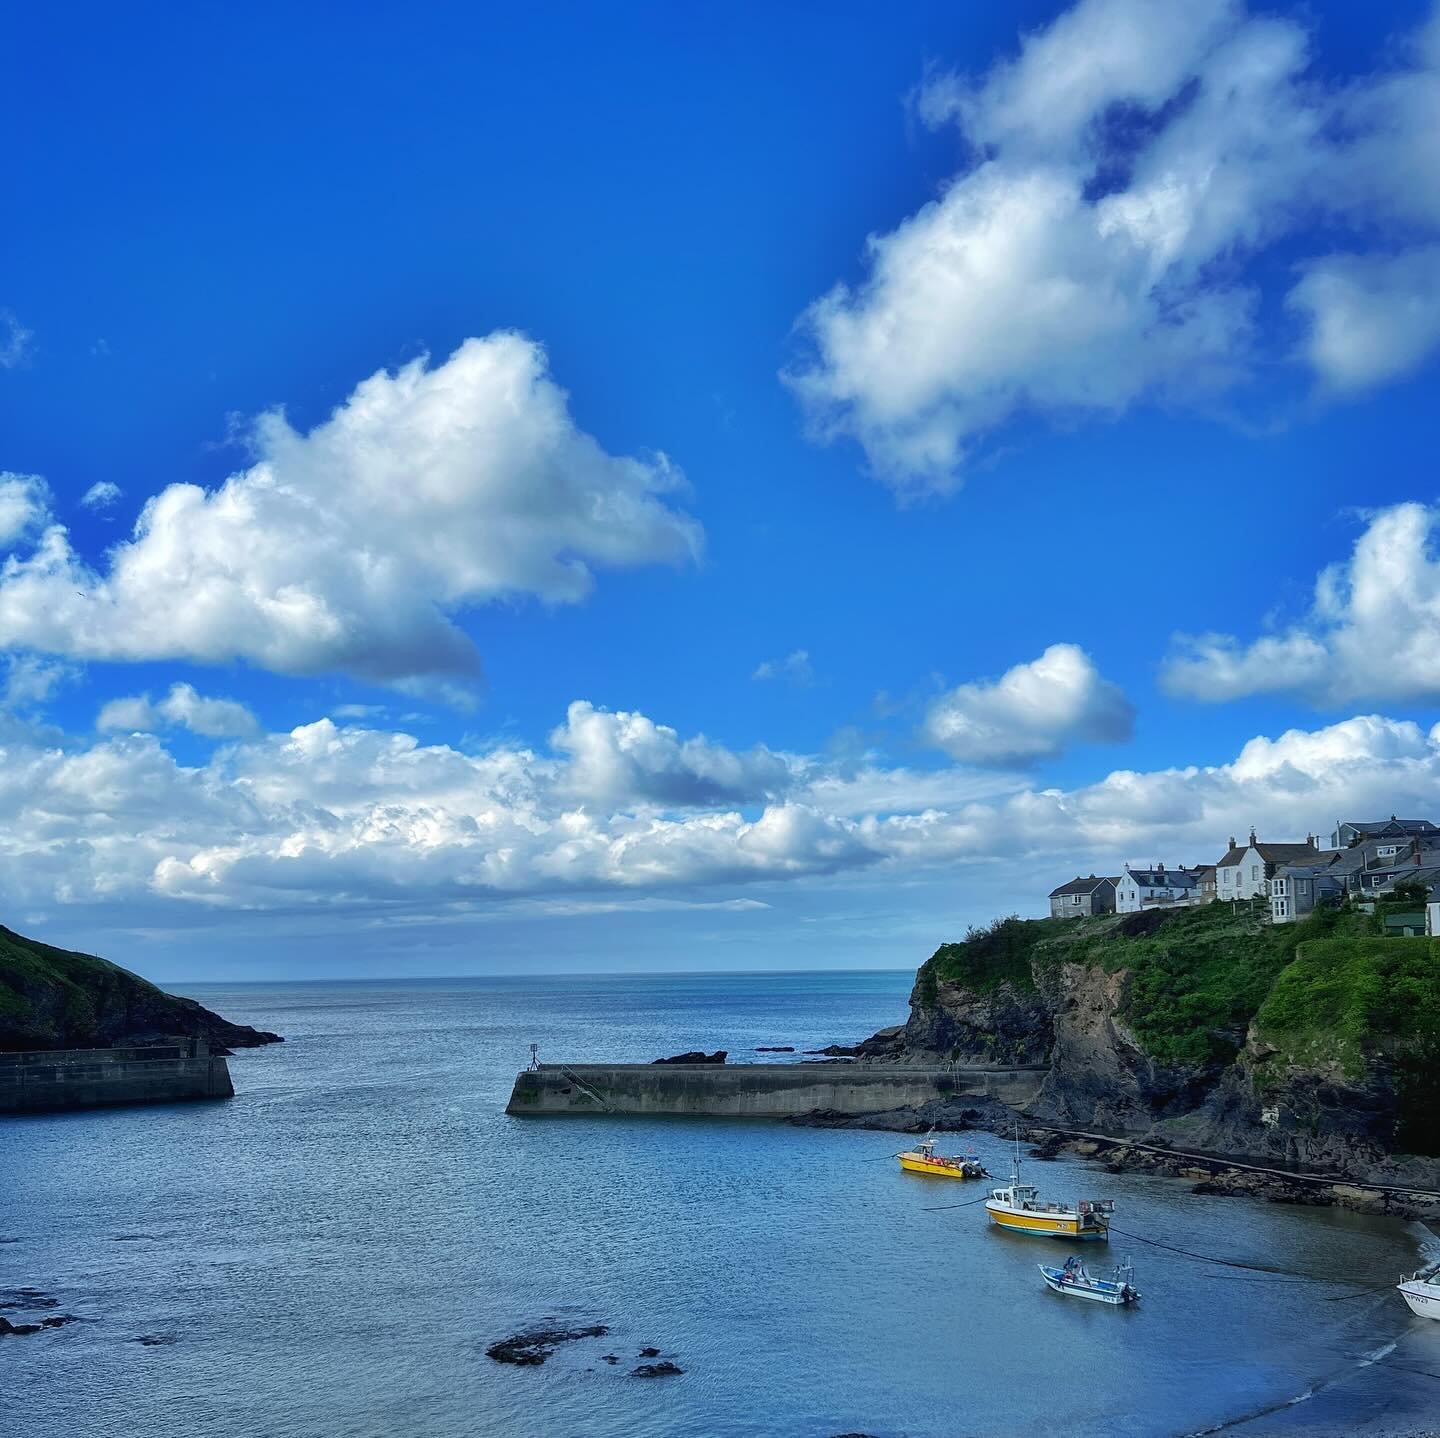 Port Isaac, a sweet little fishing village and a great place to base ourselves while exploring #cornwall